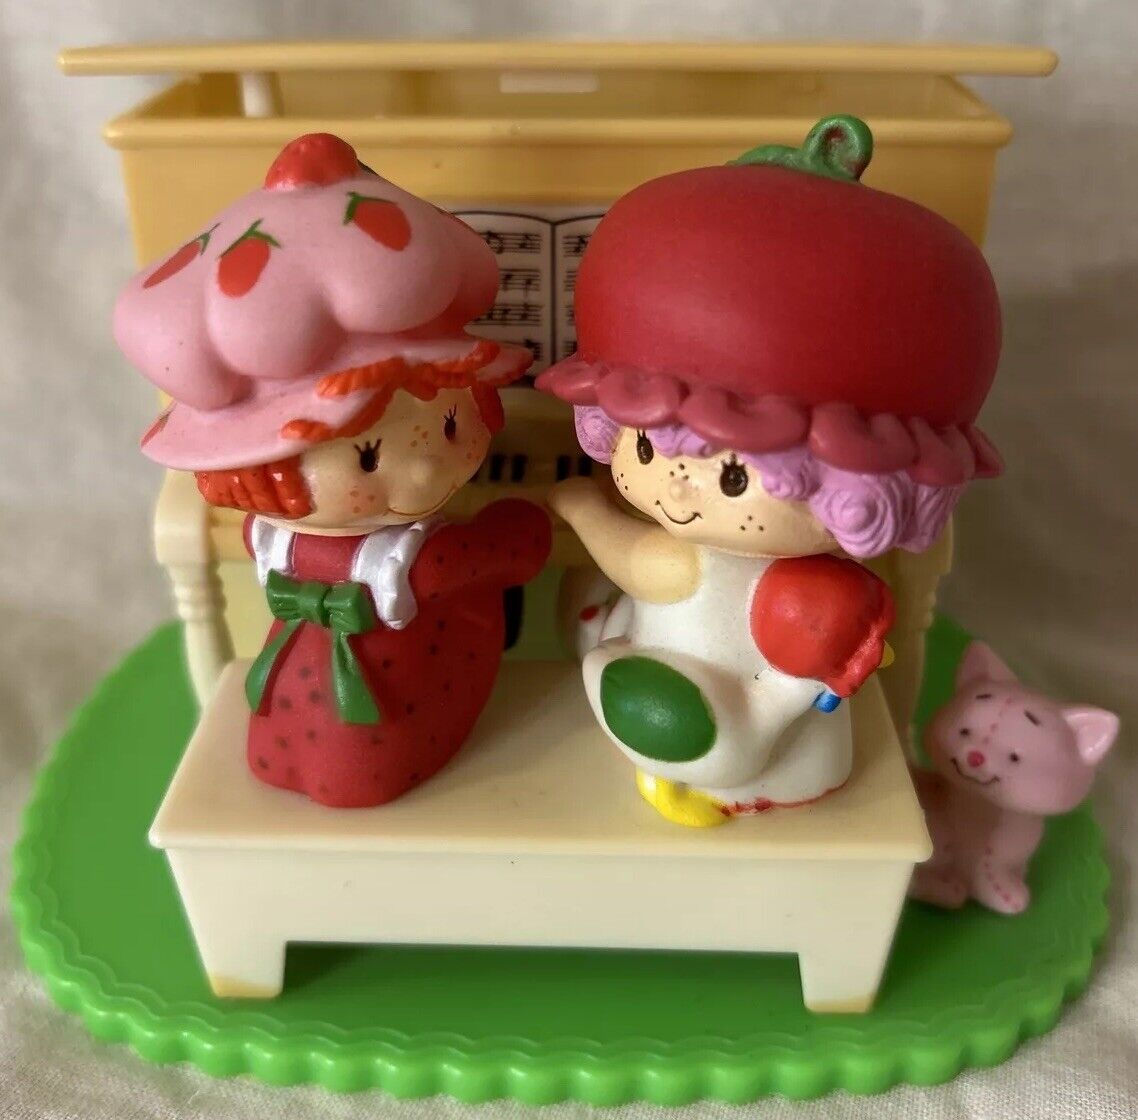 🍓 RARE 1981 Vintage Strawberry Shortcake Piano Music Box Plays “Toy Land” Song